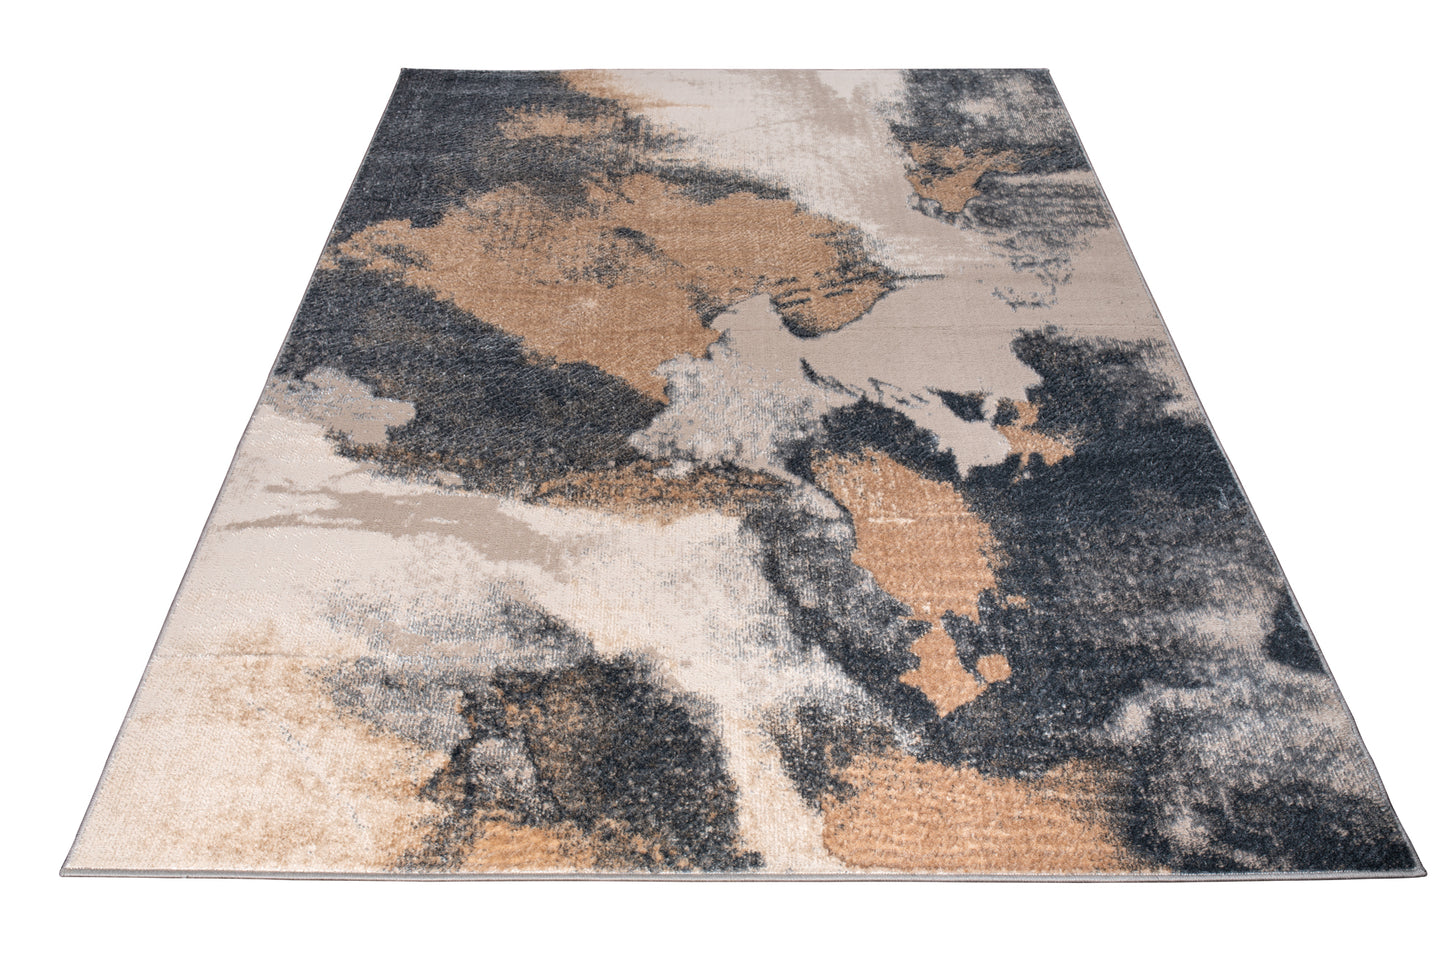 beige brown silver metalic abstract modern minimalistic contemporary area rug 4x6, 4x5 ft Small Carpet, Home Office, Living Room, Bedroom